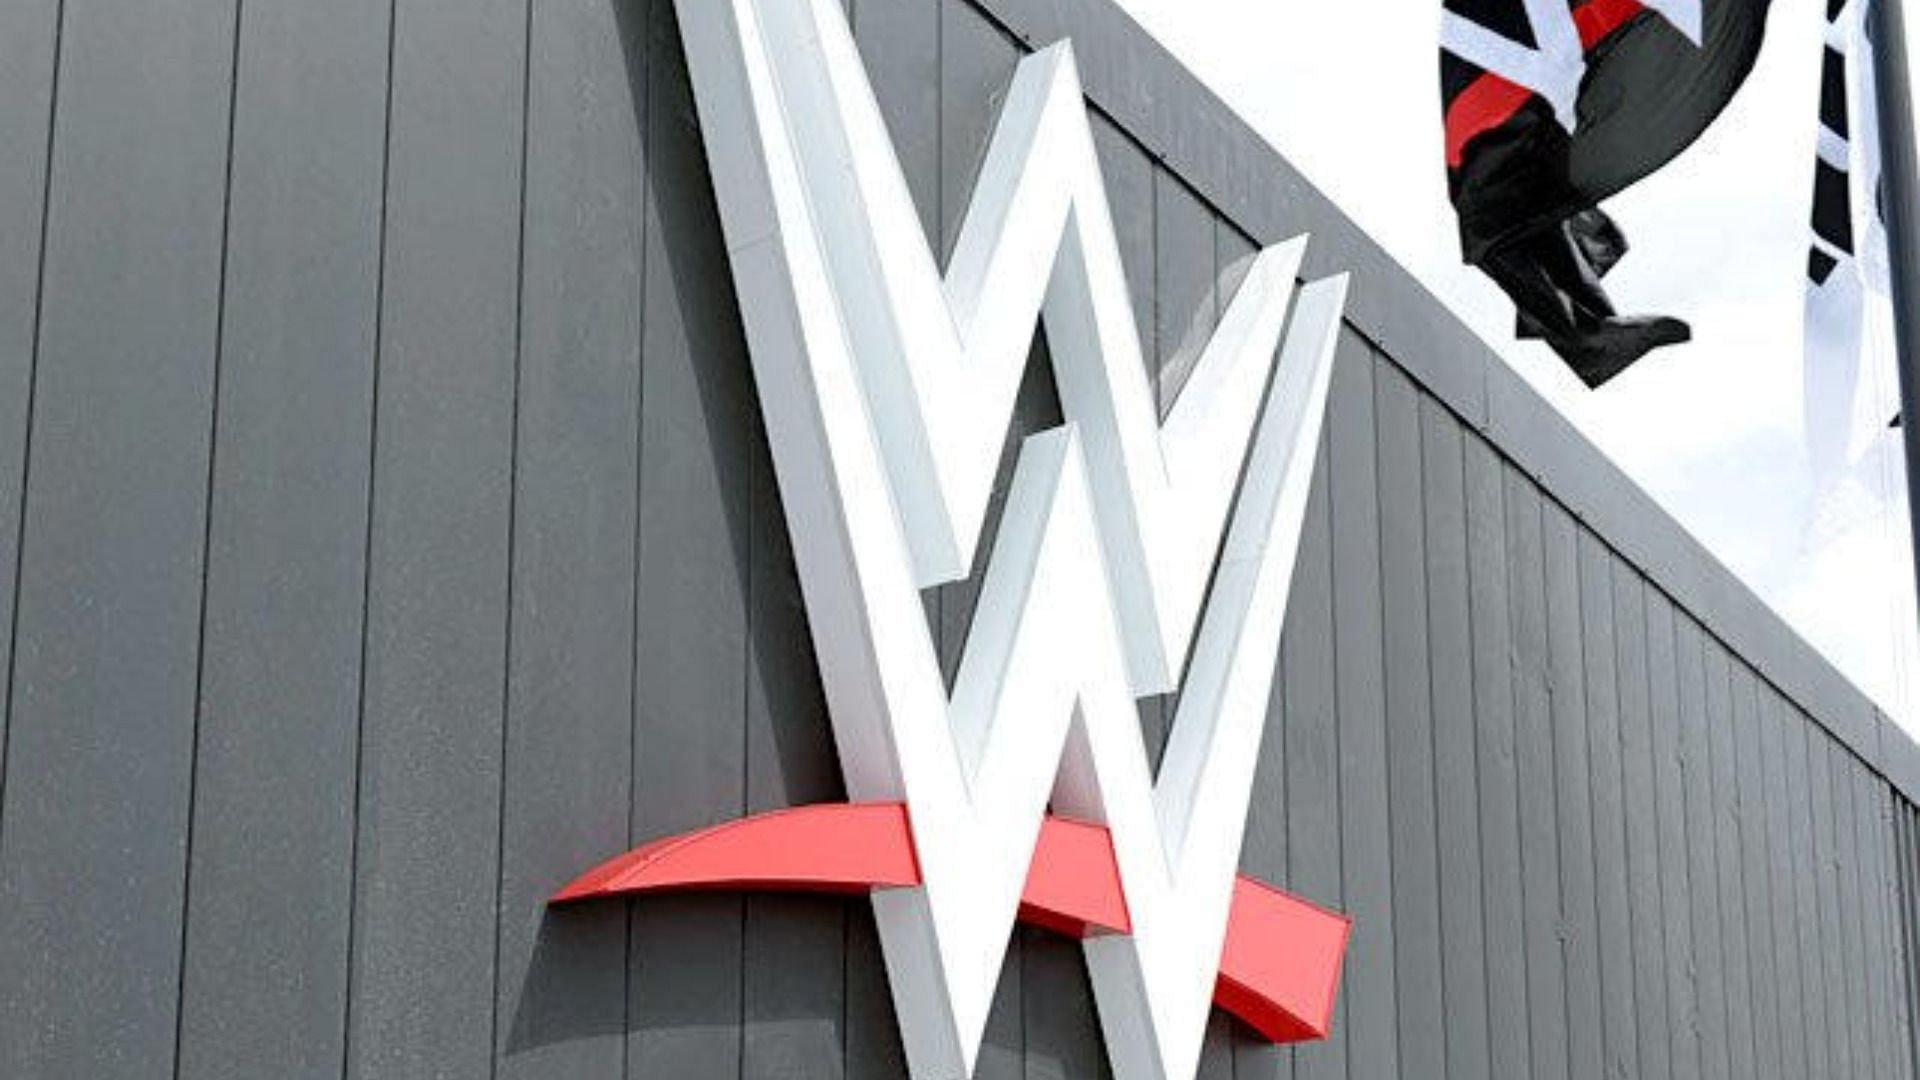 The giant WWE logo on the HQ is perhaps its most prominent feature.